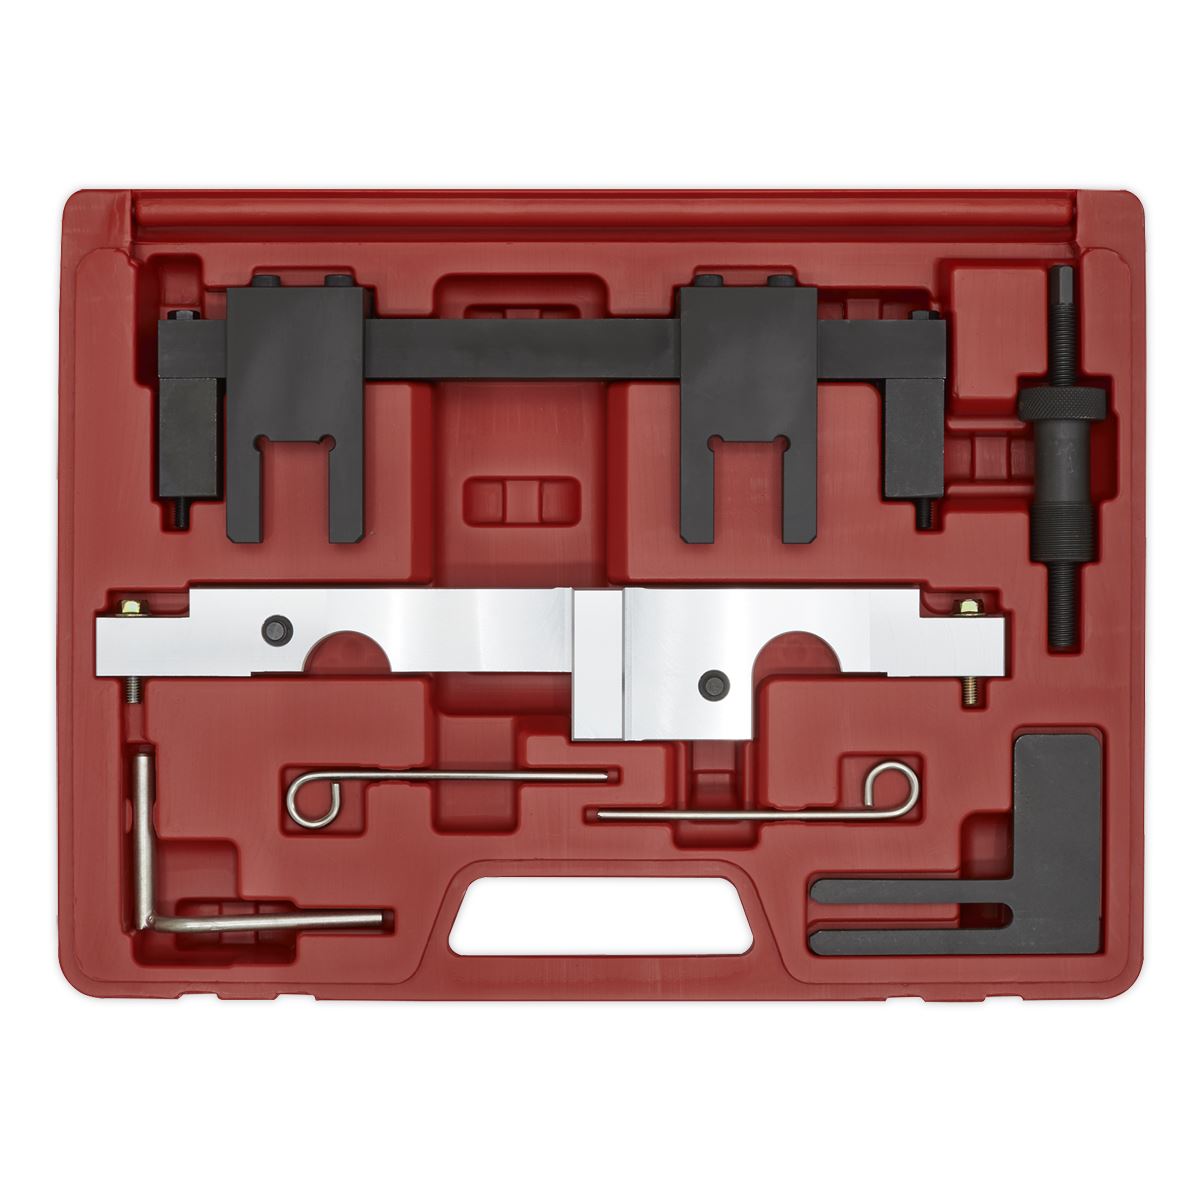 Sealey Petrol Engine Timing Tool Kit - for BMW 1.6/2.0 N43 - Chain Drive